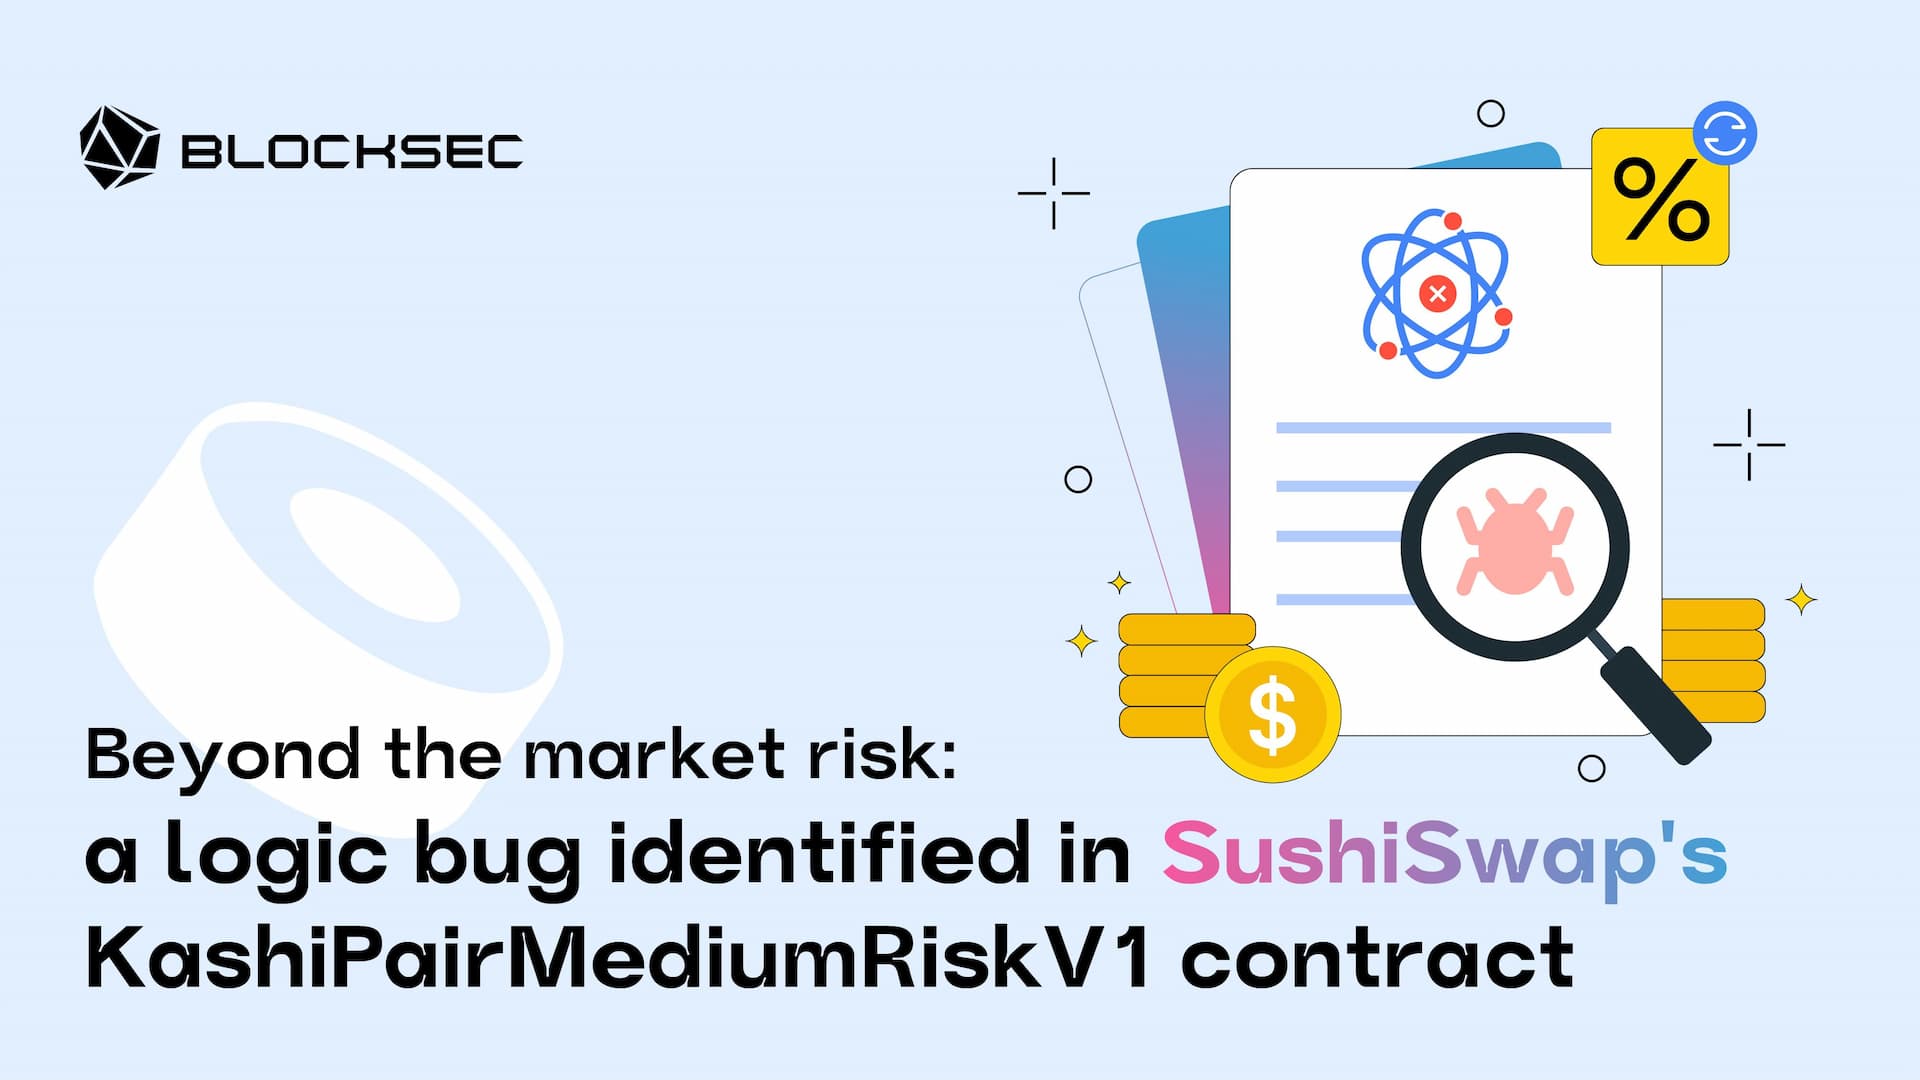 Beyond the Market Risk: A Logic Bug Identified in SushiSwap's KashiPairMediumRiskV1 Contract